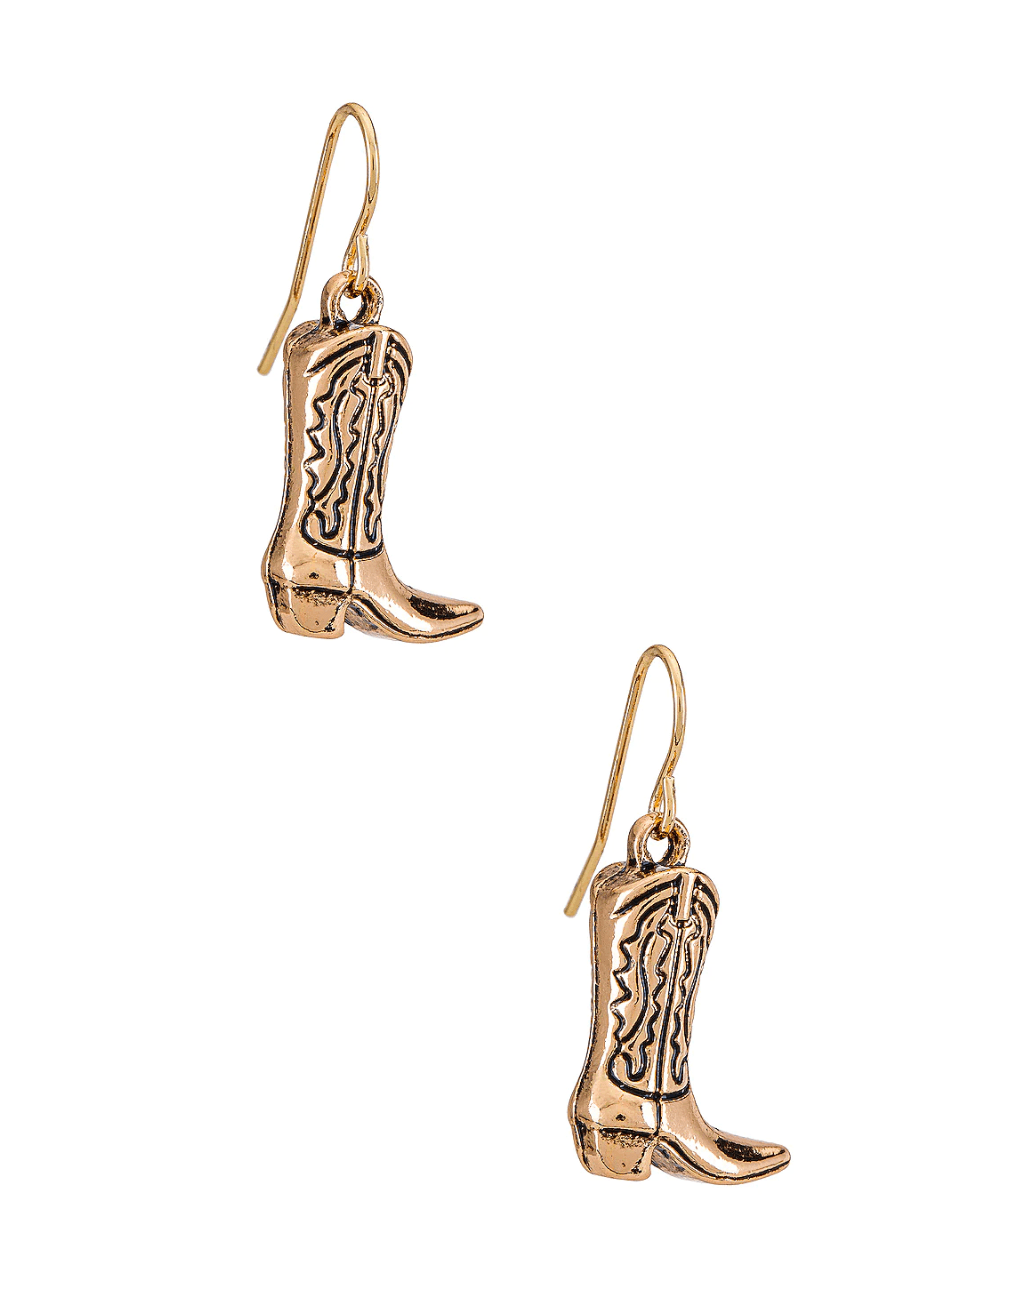 COWBOY BOOT EARRING - 8 Other Reasons